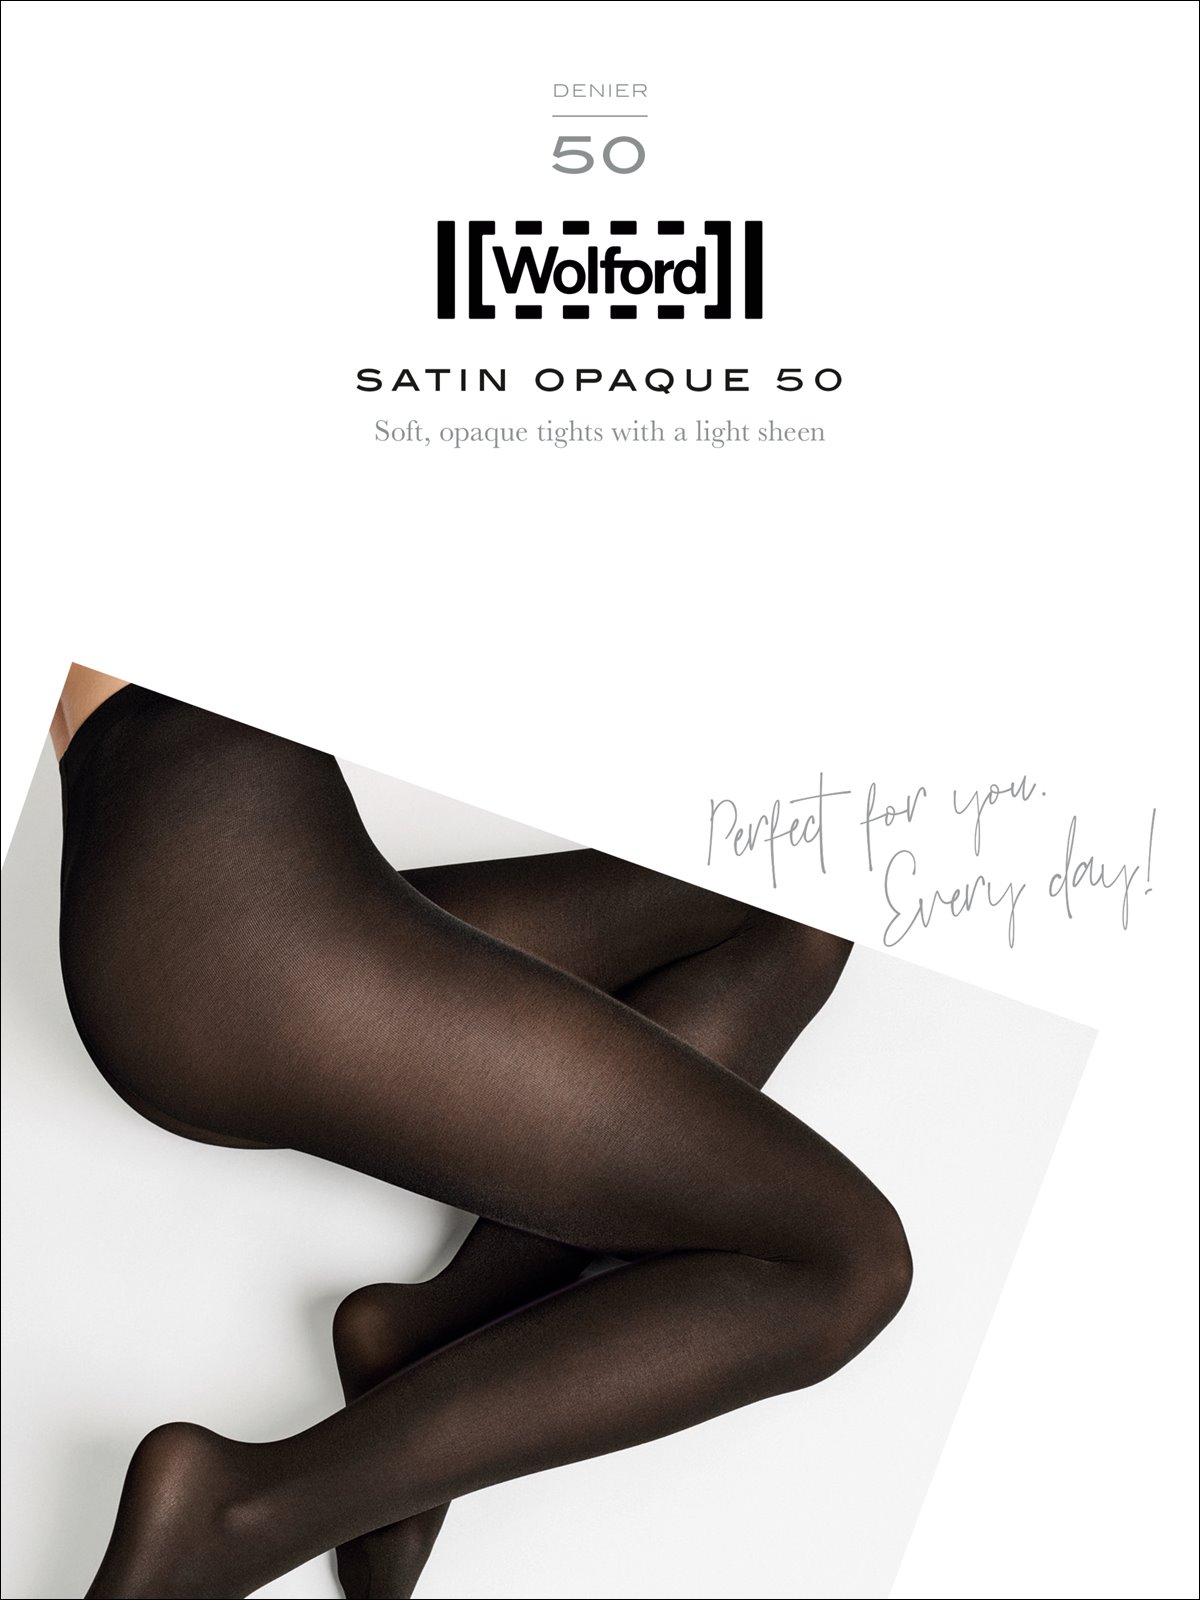 collants wolford 40 deniers